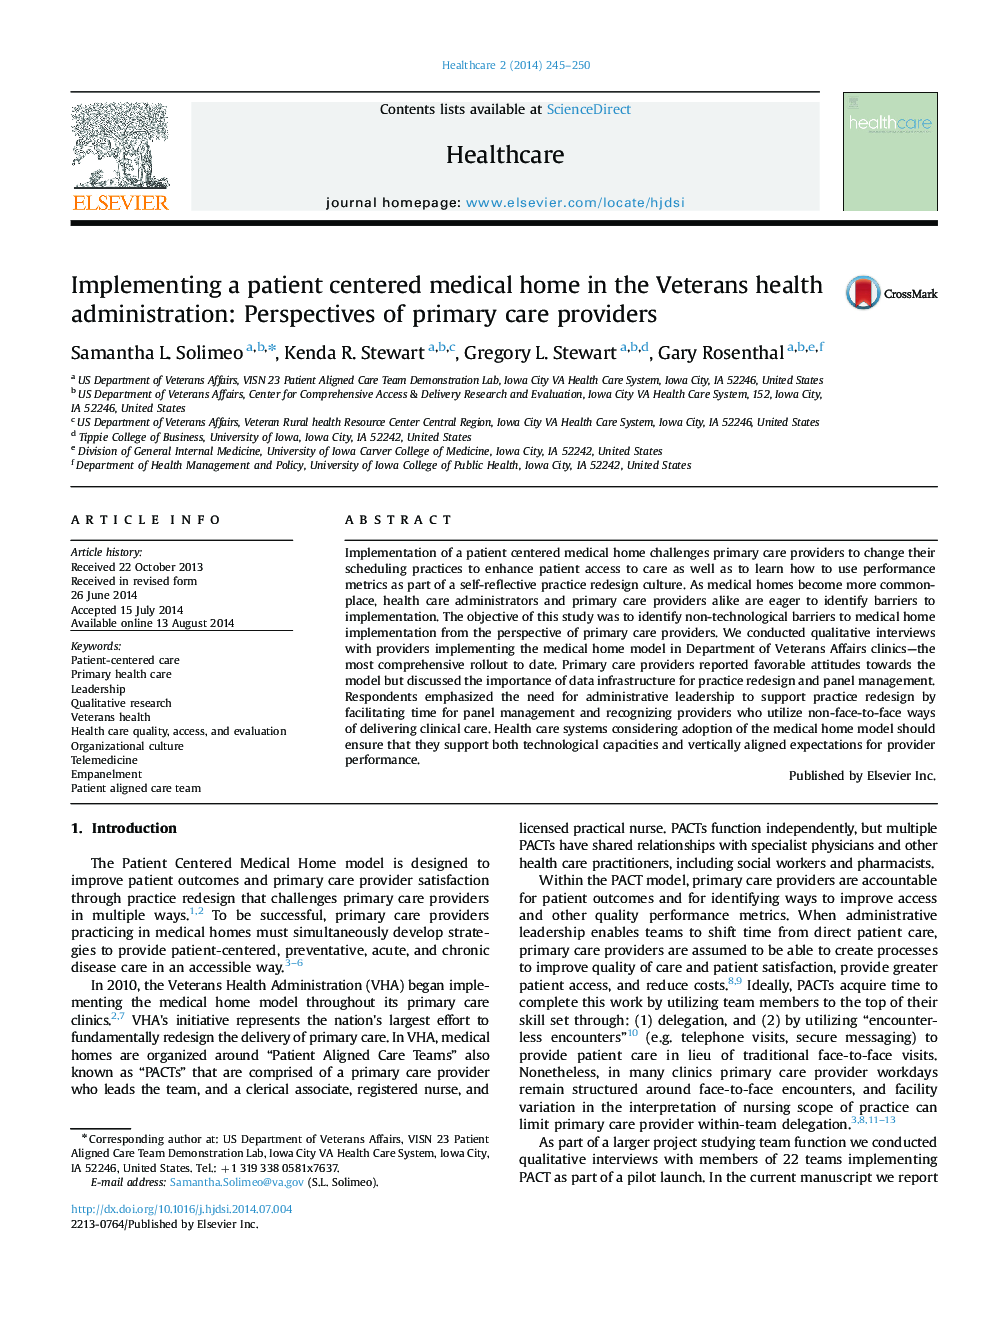 Implementing a patient centered medical home in the Veterans health administration: Perspectives of primary care providers